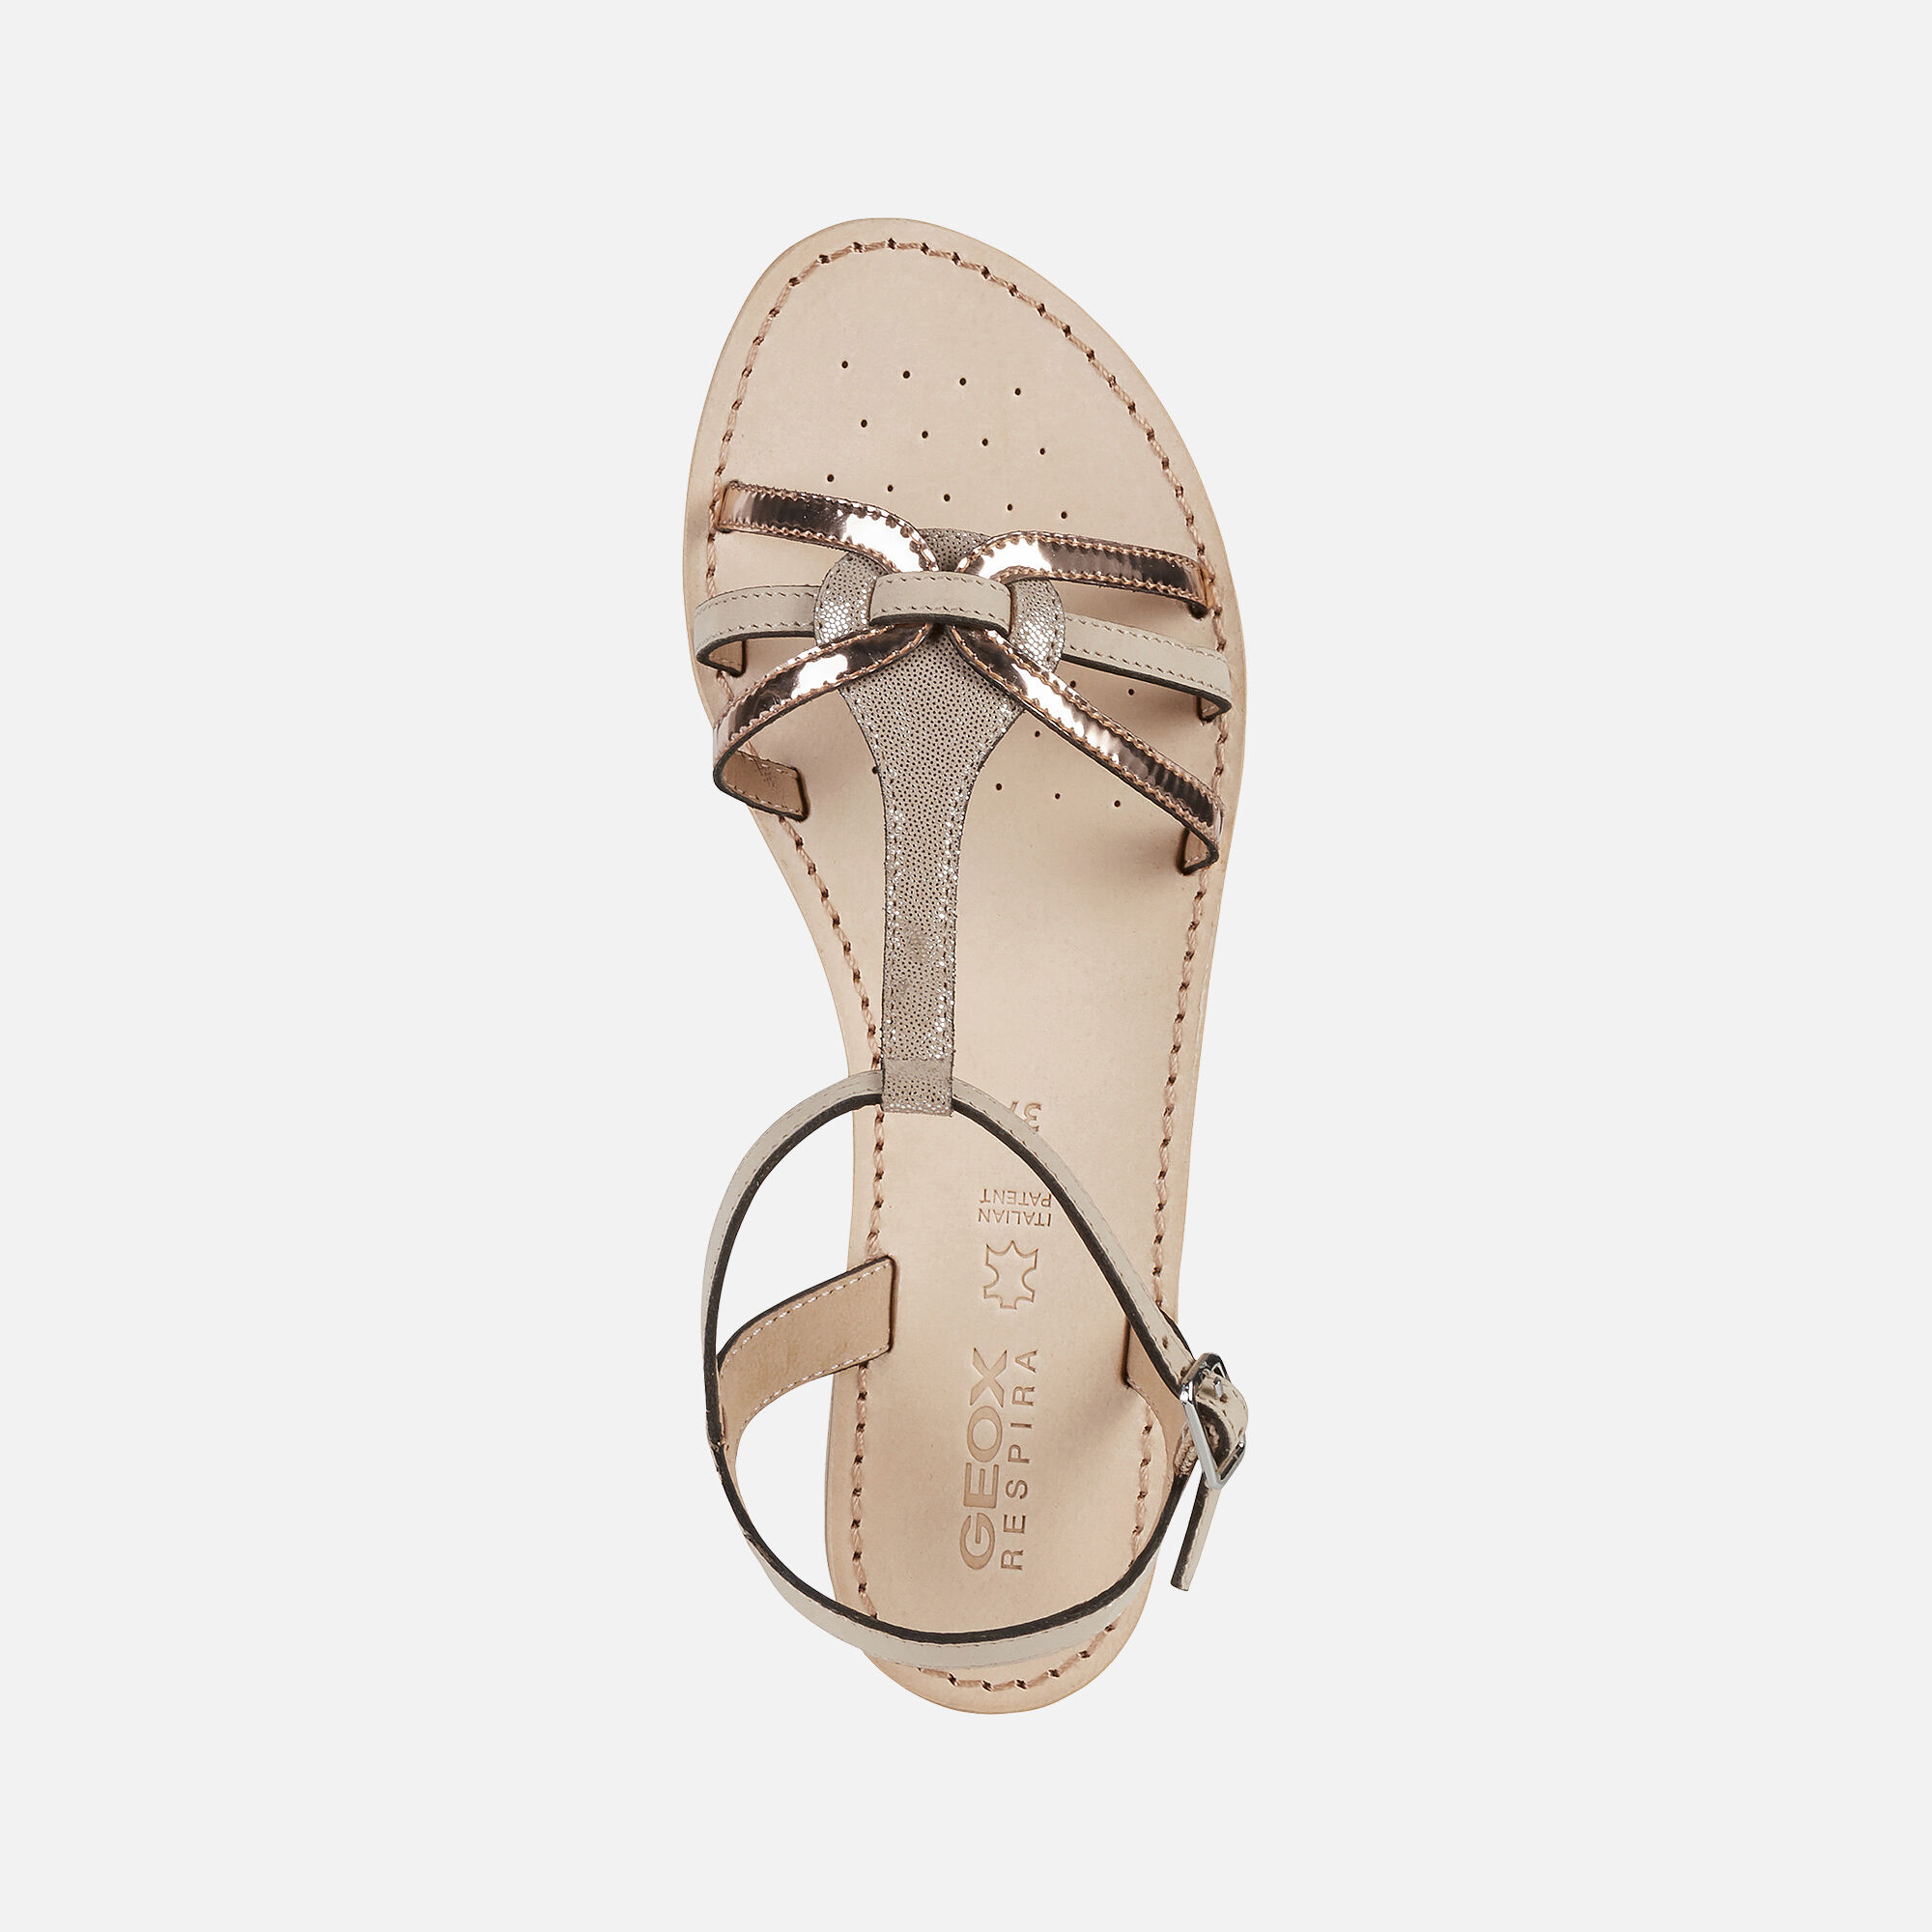 Geox SOZY Woman: Lt Taupe Sandals | Geox ® Official Store